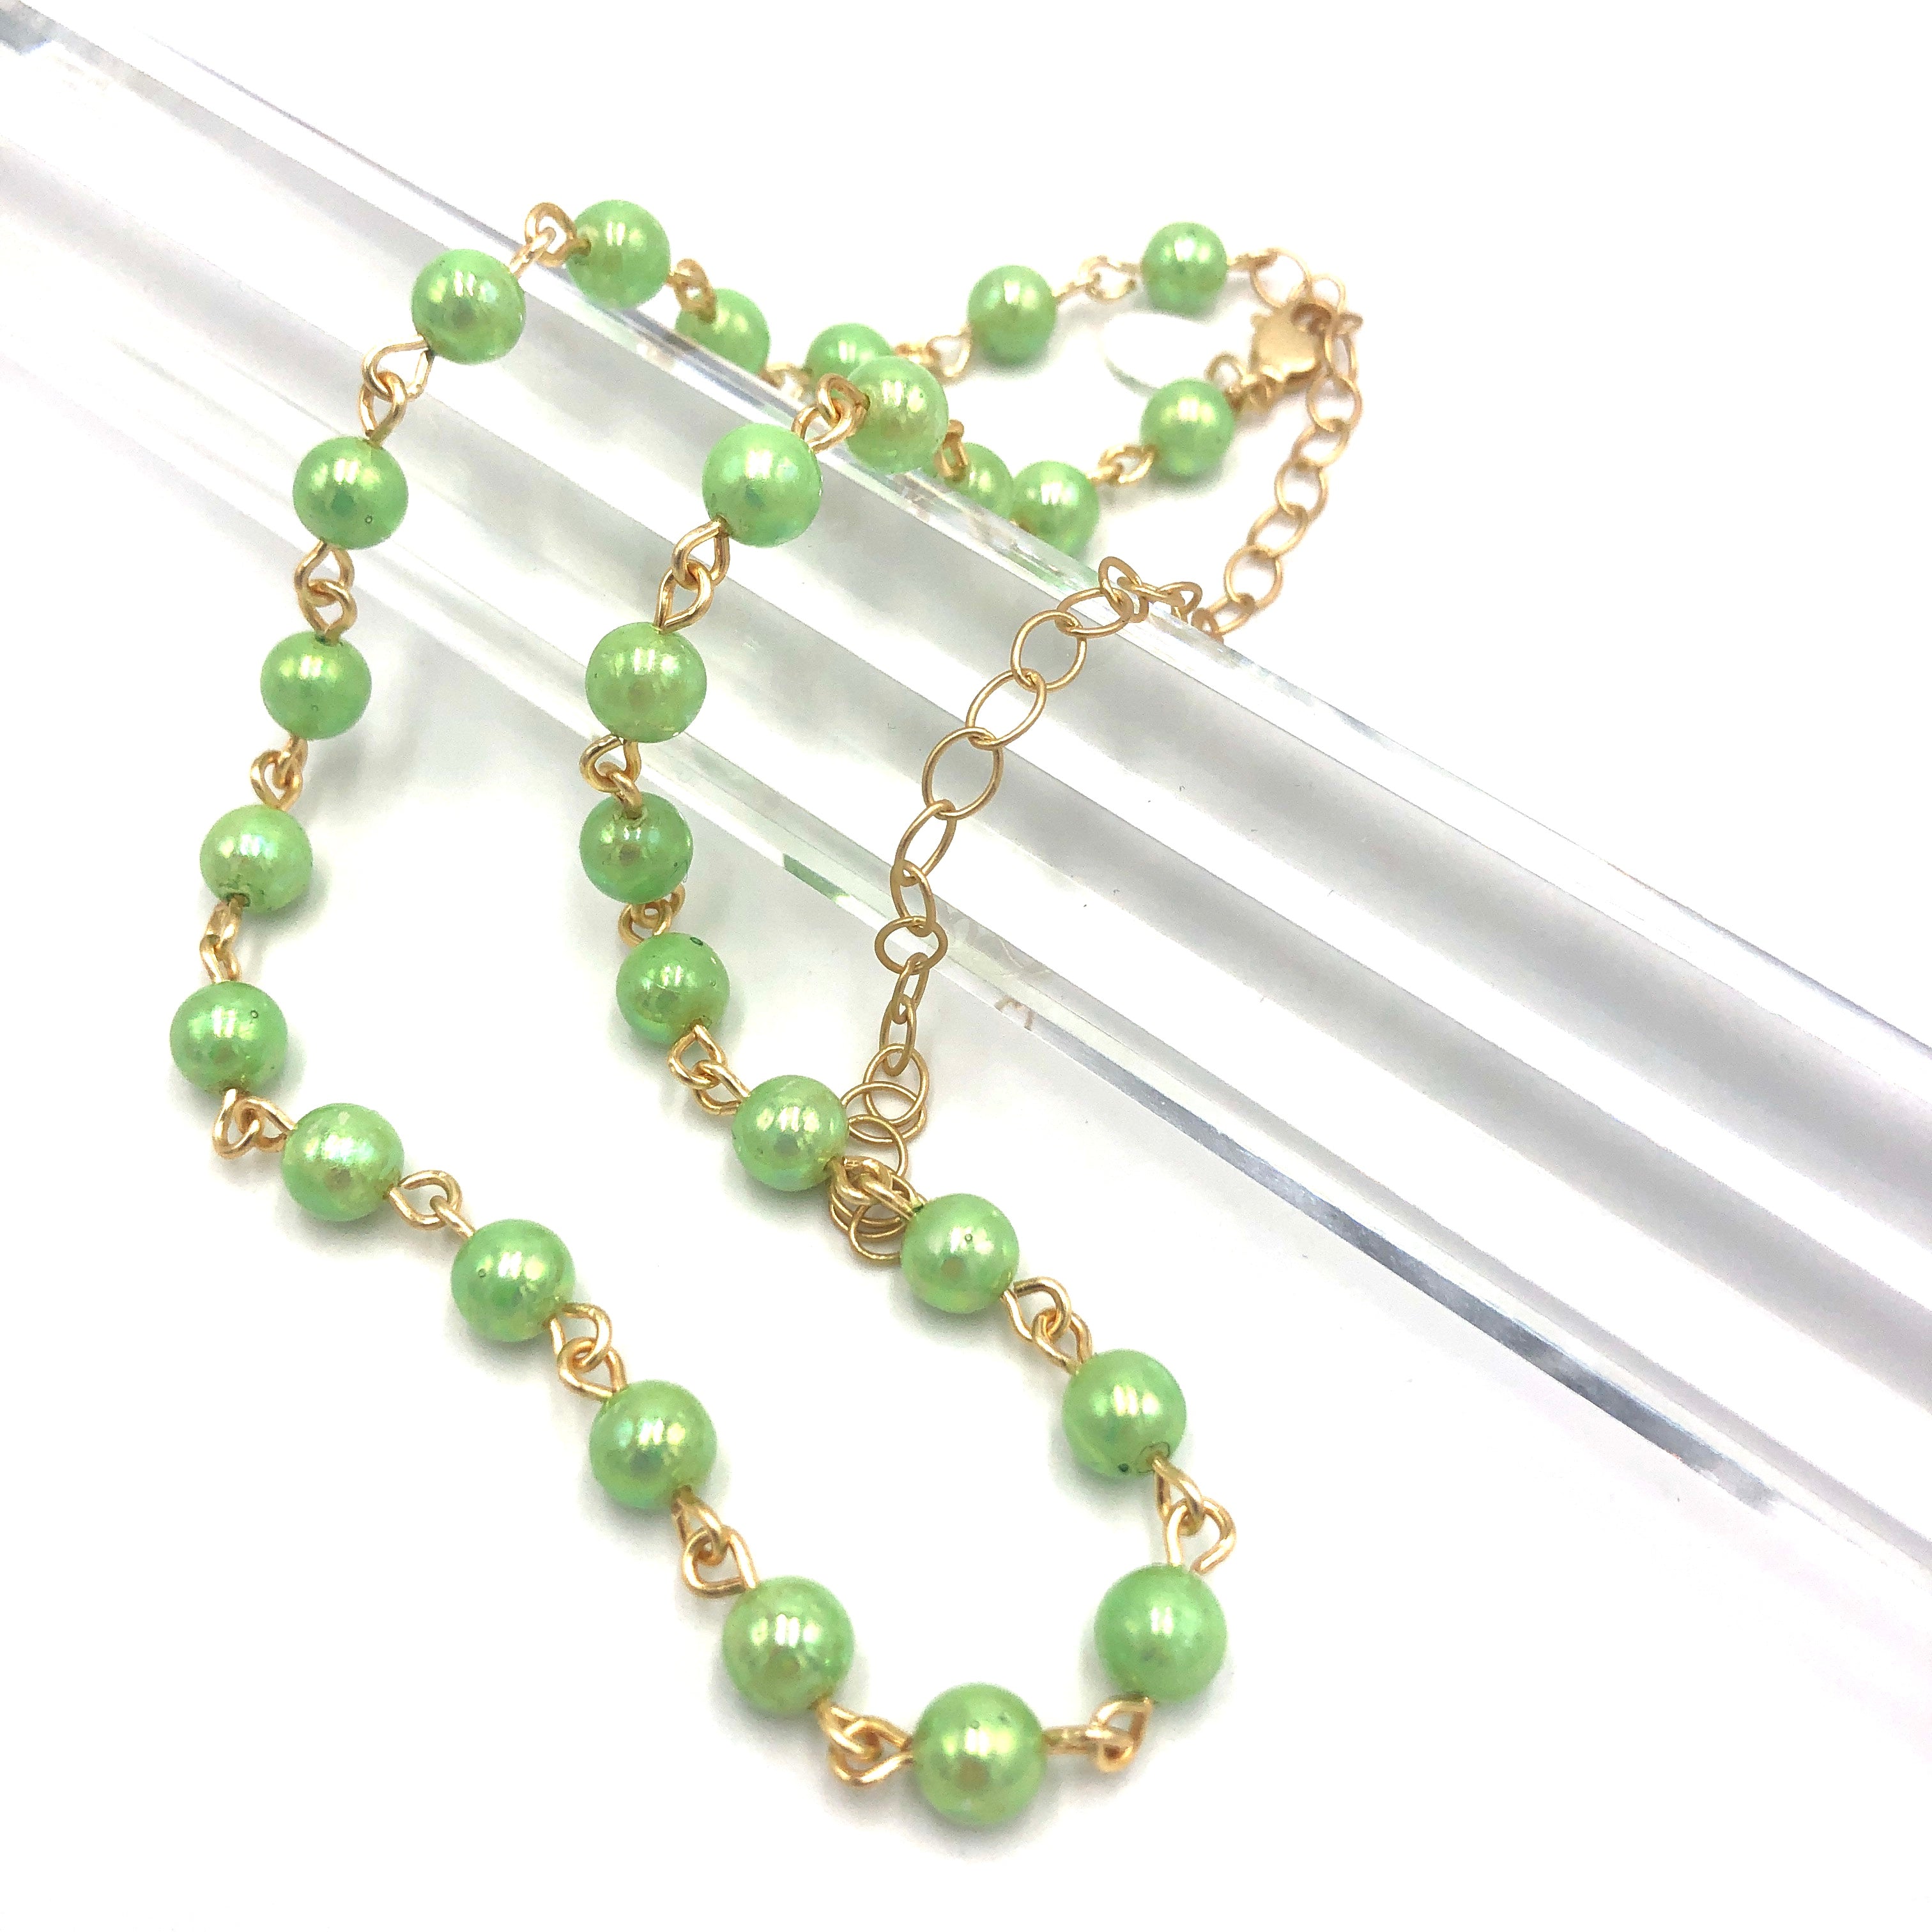 Green Luster Pearlized Amelia Necklace *